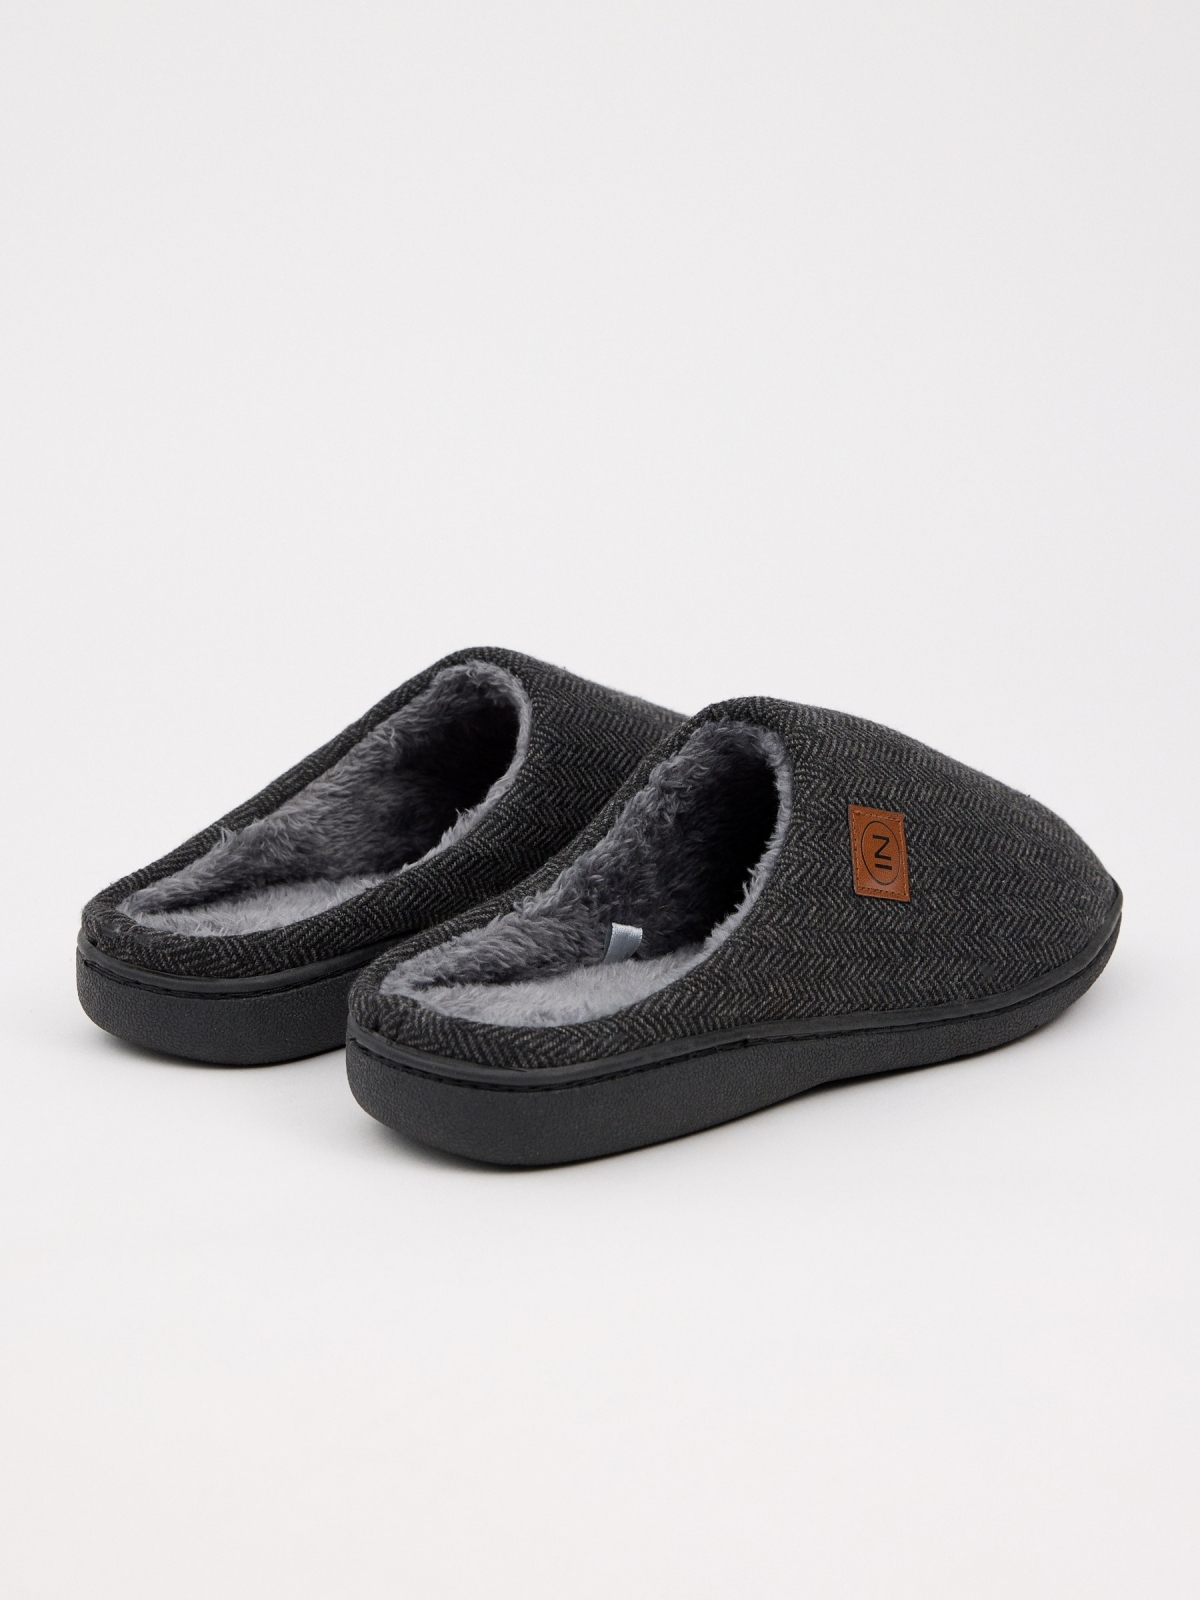 Fur lined home slippers dark grey front view